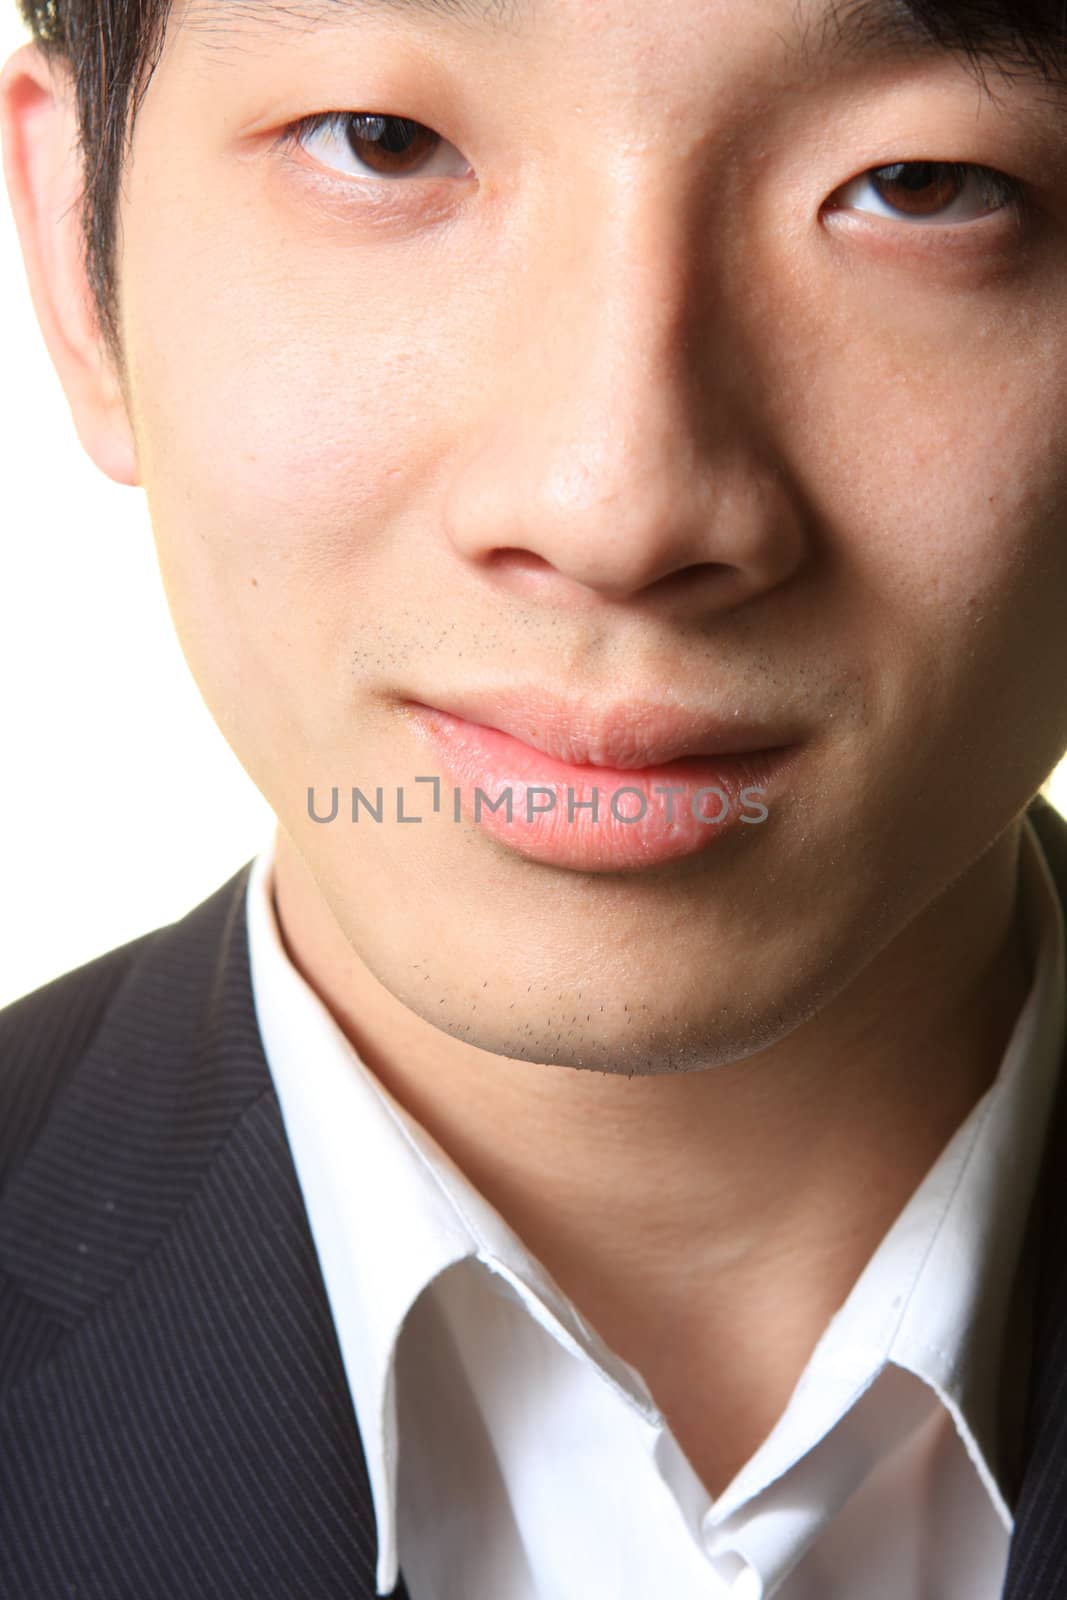 Close up portrait of man smiling on white background